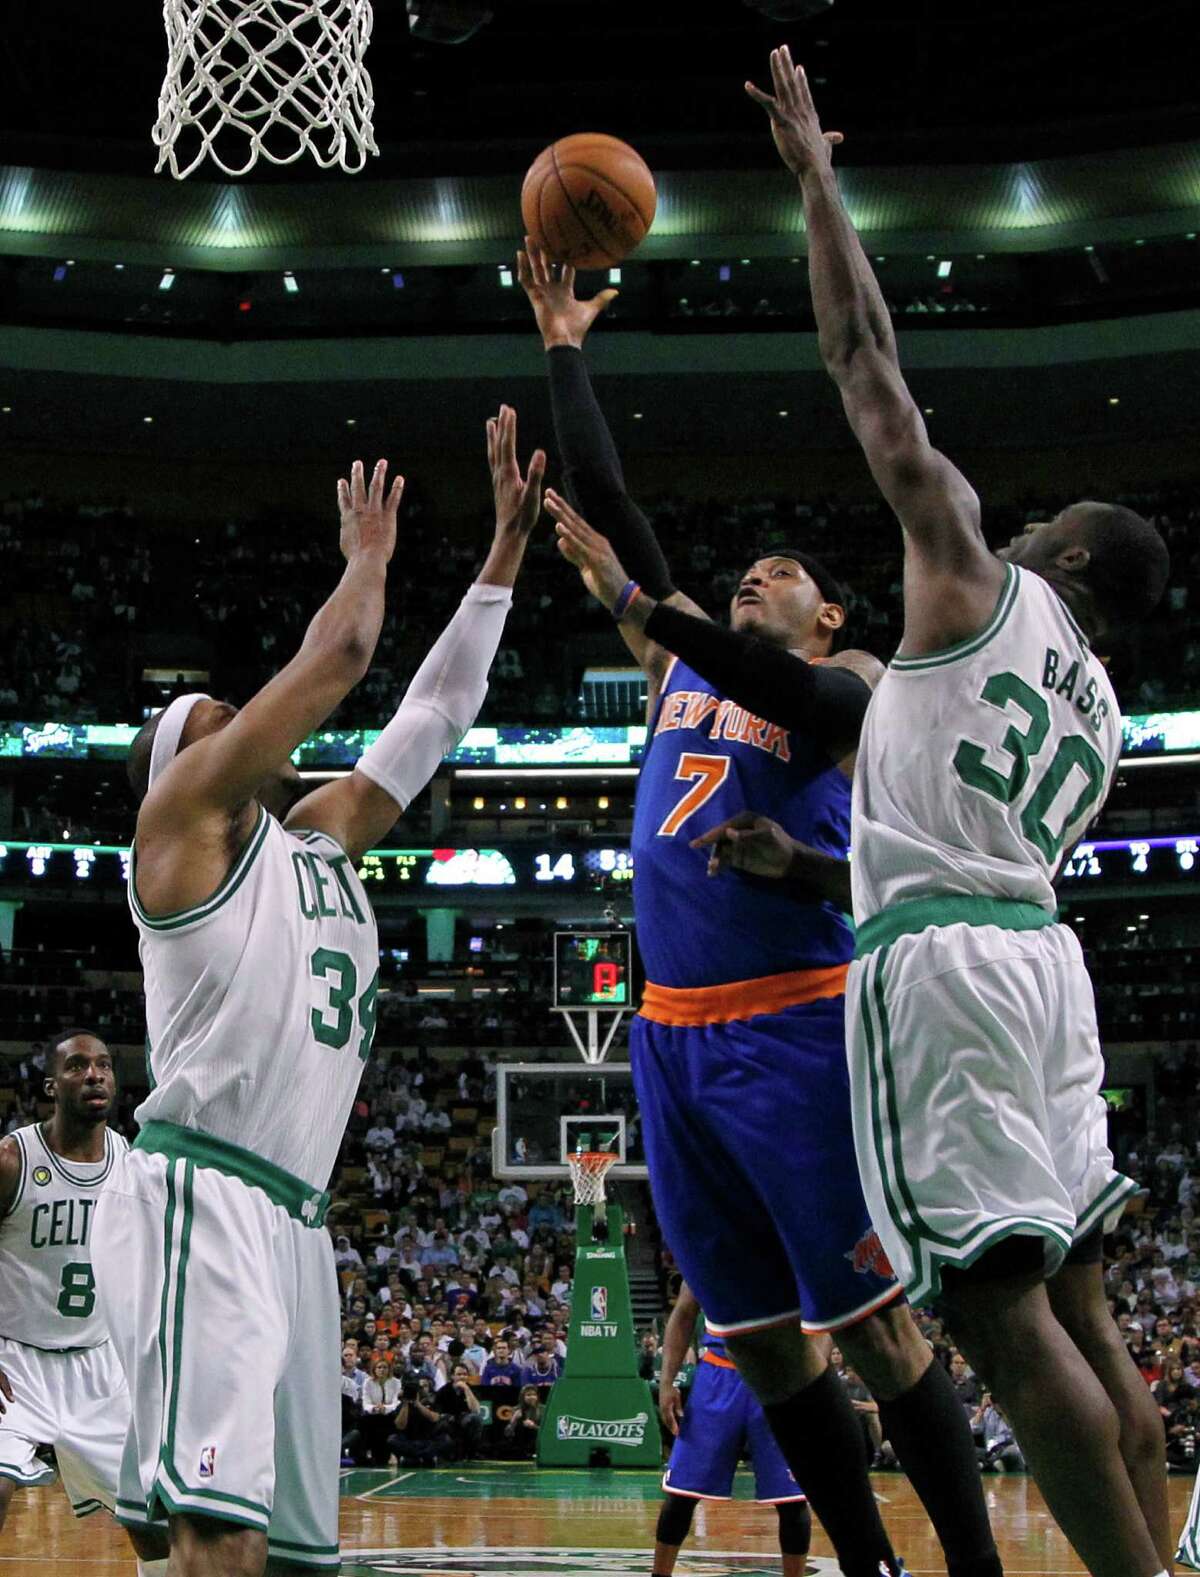 New York Knicks forward Carmelo Anthony (7) shoots against Boston Celtics forwards Paul Pierce (34) and Brandon Bass (30) during the first half in Game 4 of a first-round NBA basketball playoff series in Boston, Sunday, April 28, 2013. (AP Photo/Elise Amendola)